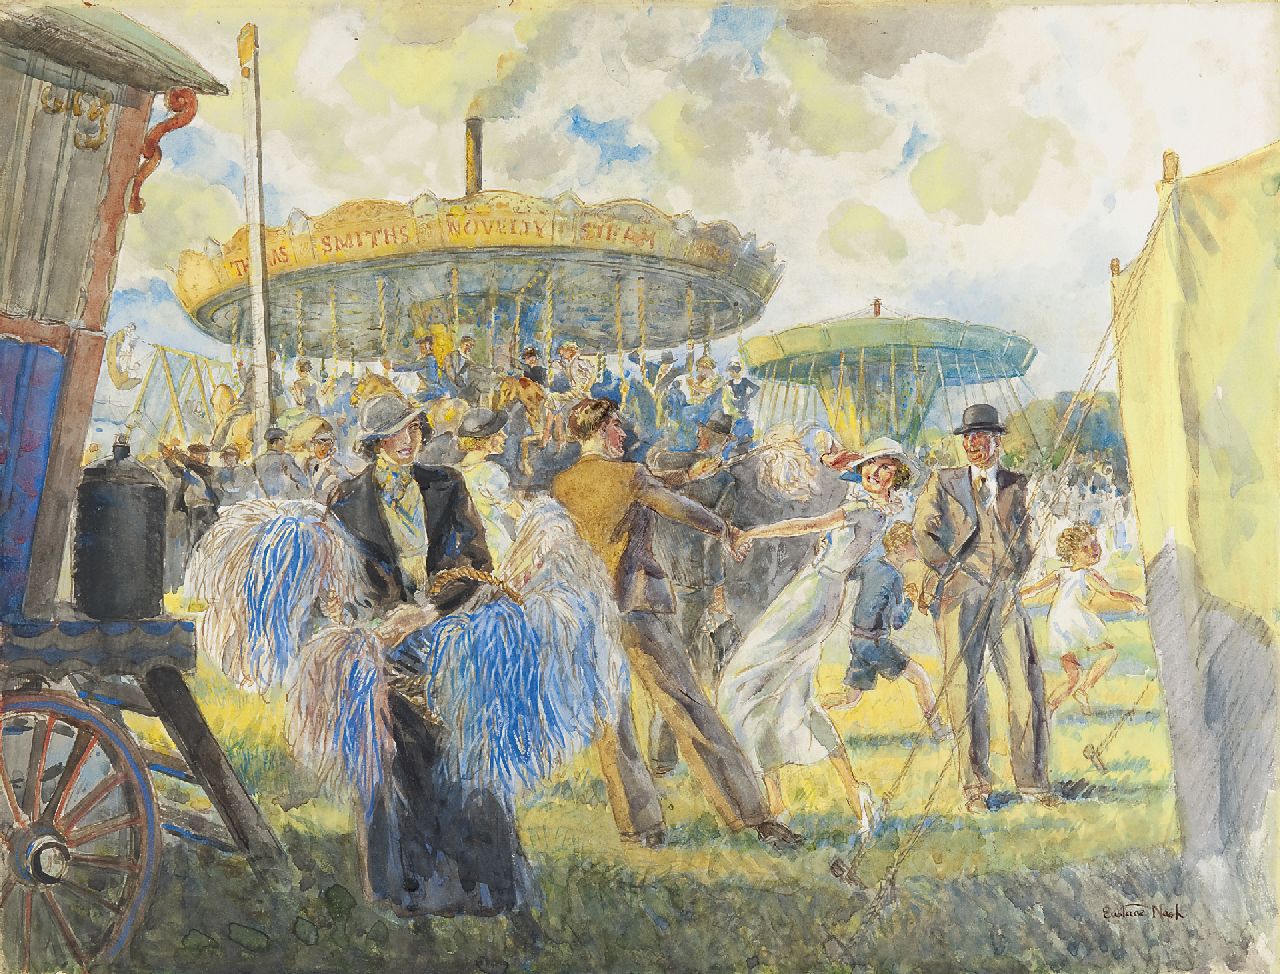 Eustace Nash | At the fairground, watercolour and gouache on paper, 39.5 x 52.2 cm, signed l.r.